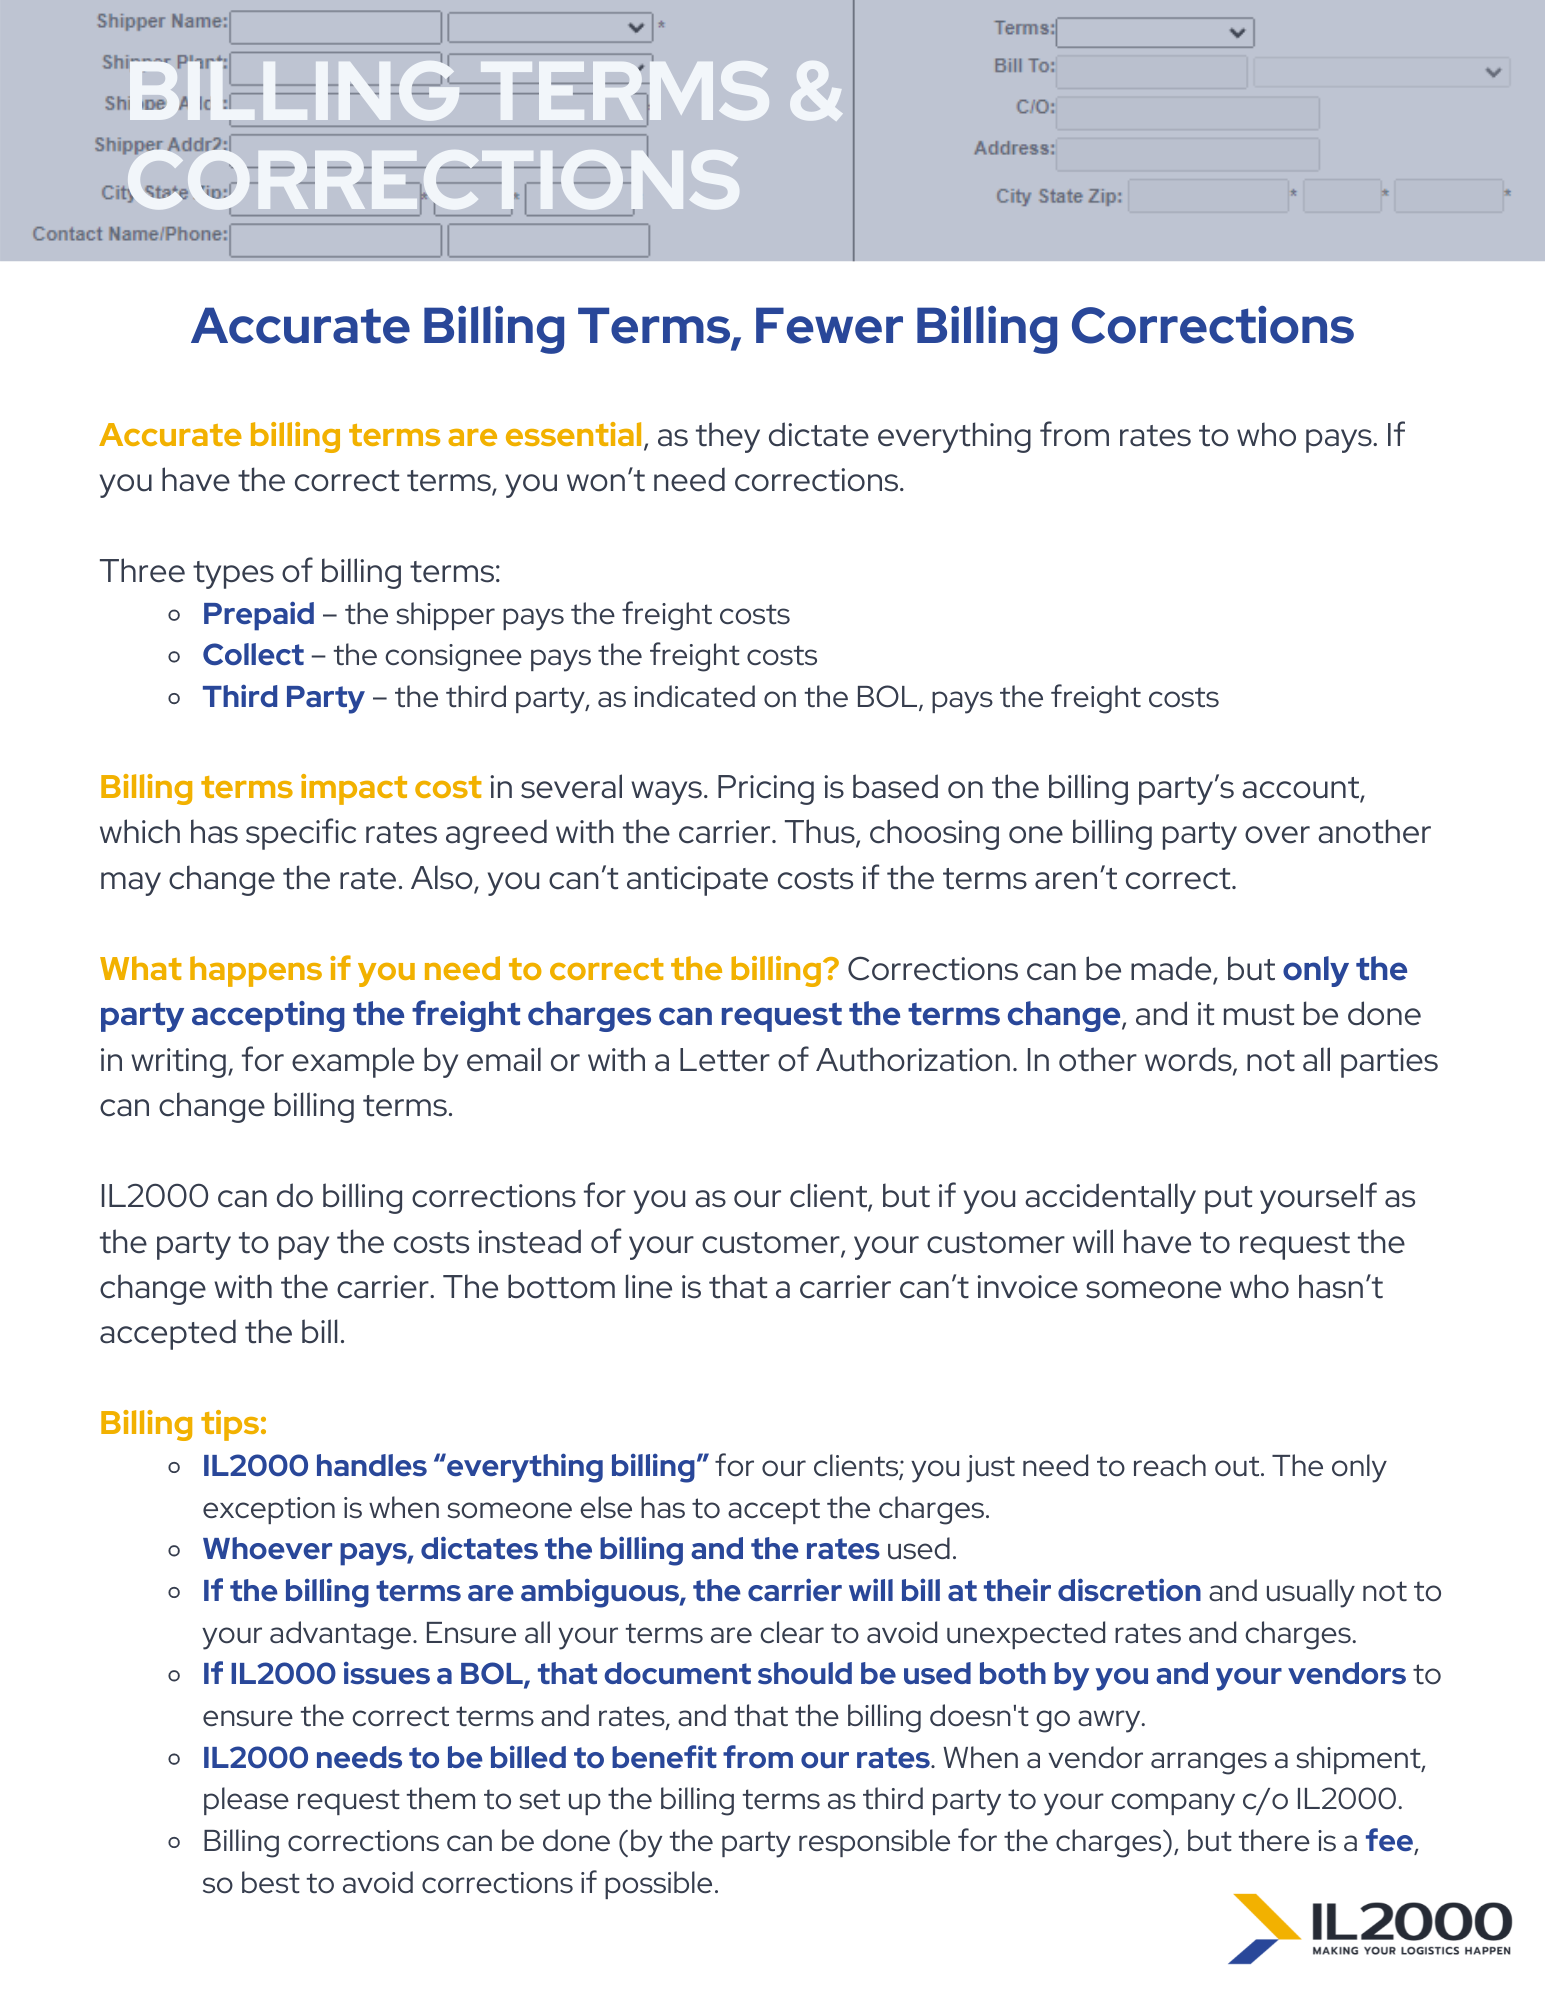 One Sheet_Billing Terms & Corrections